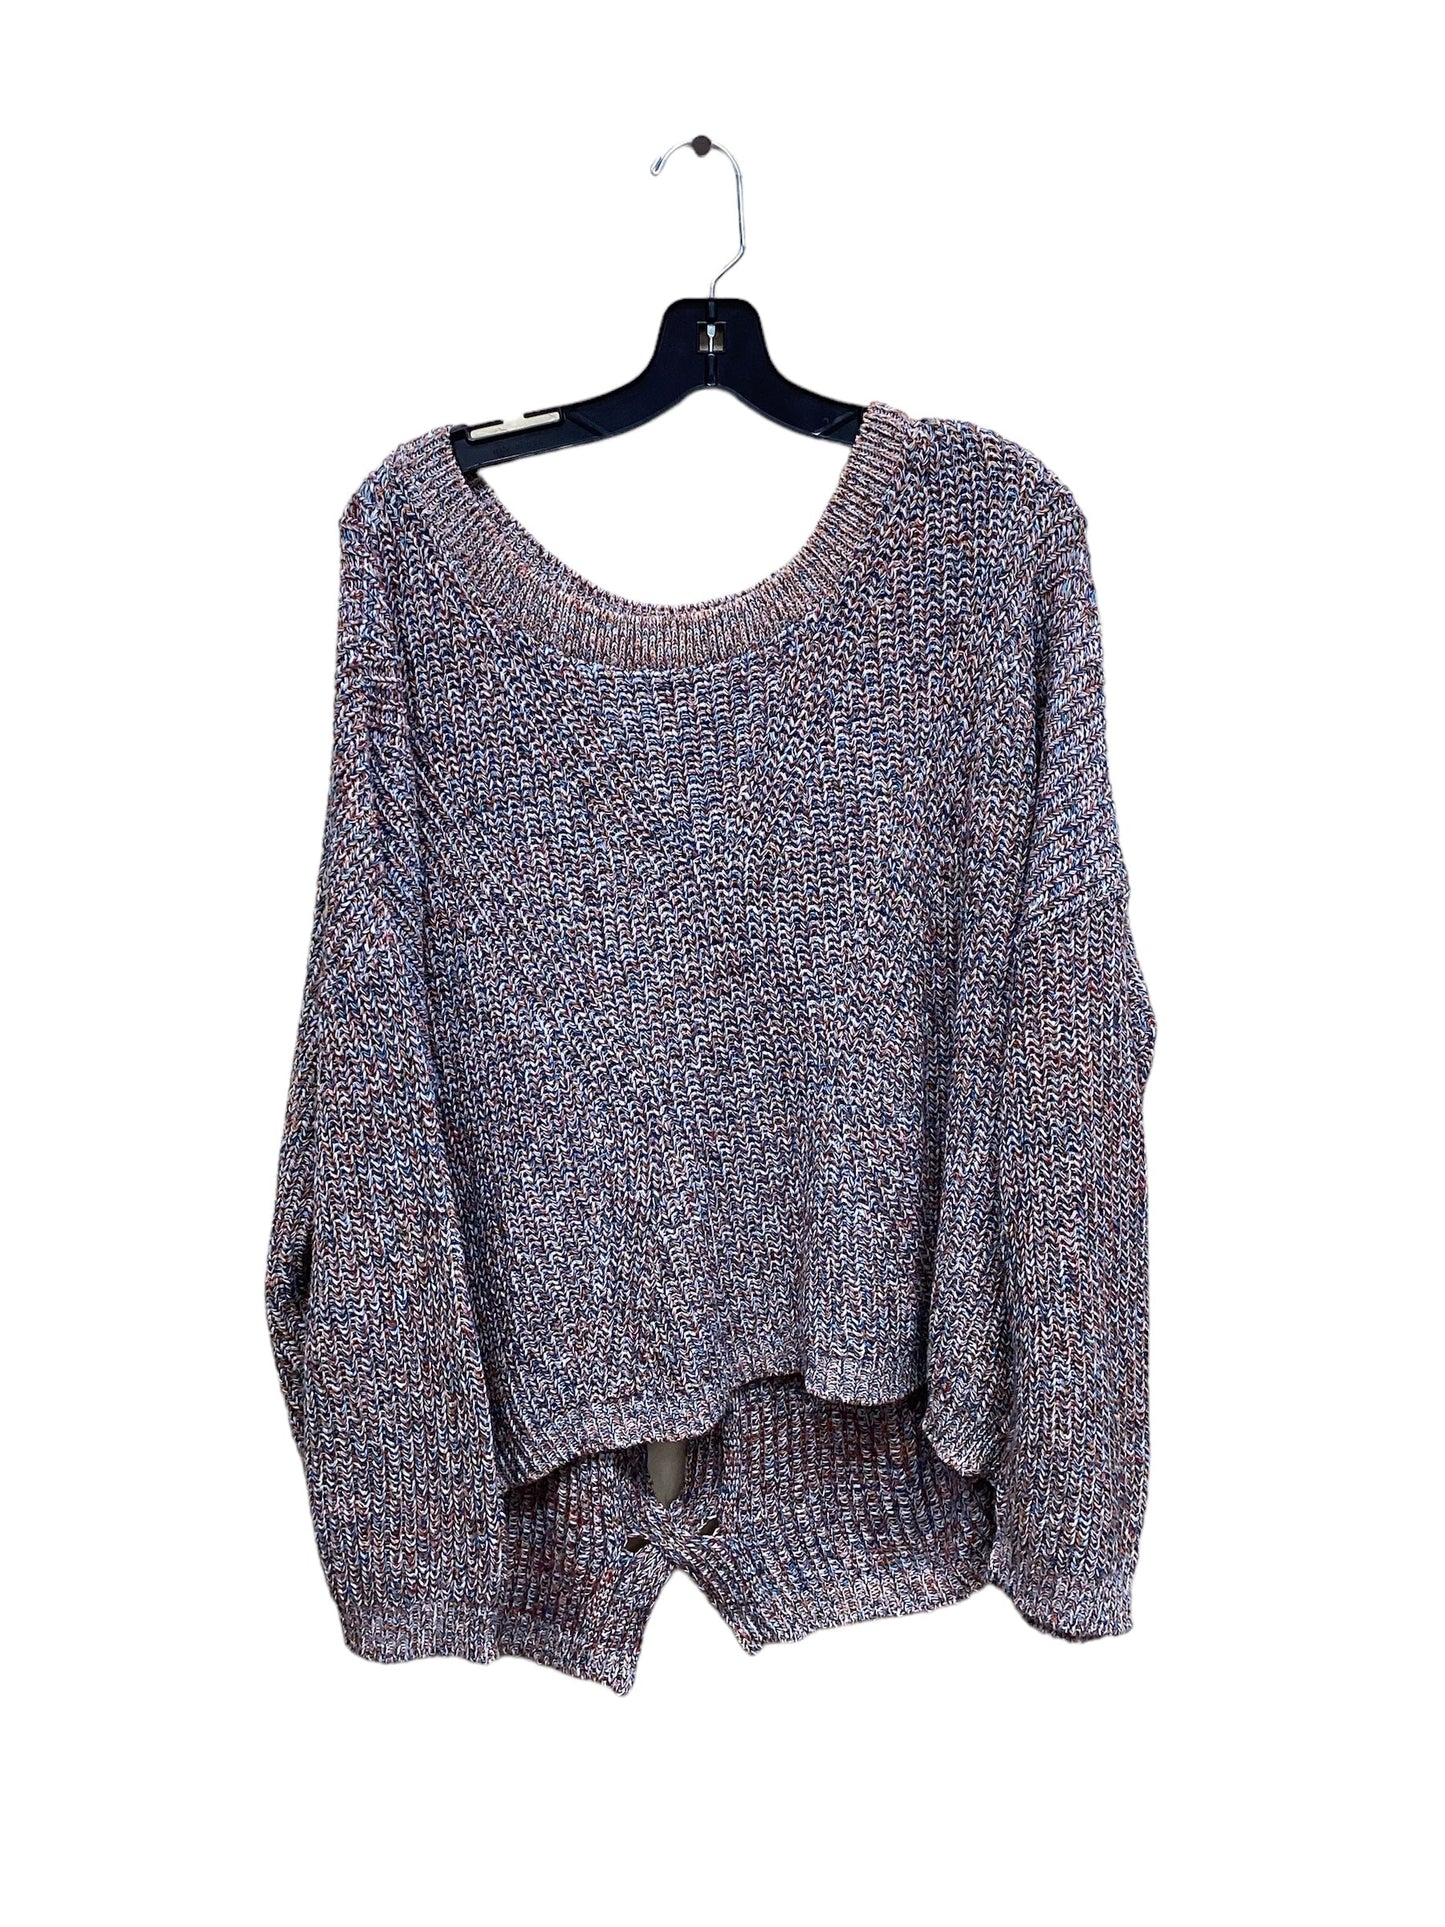 Sweater By Express  Size: Xl